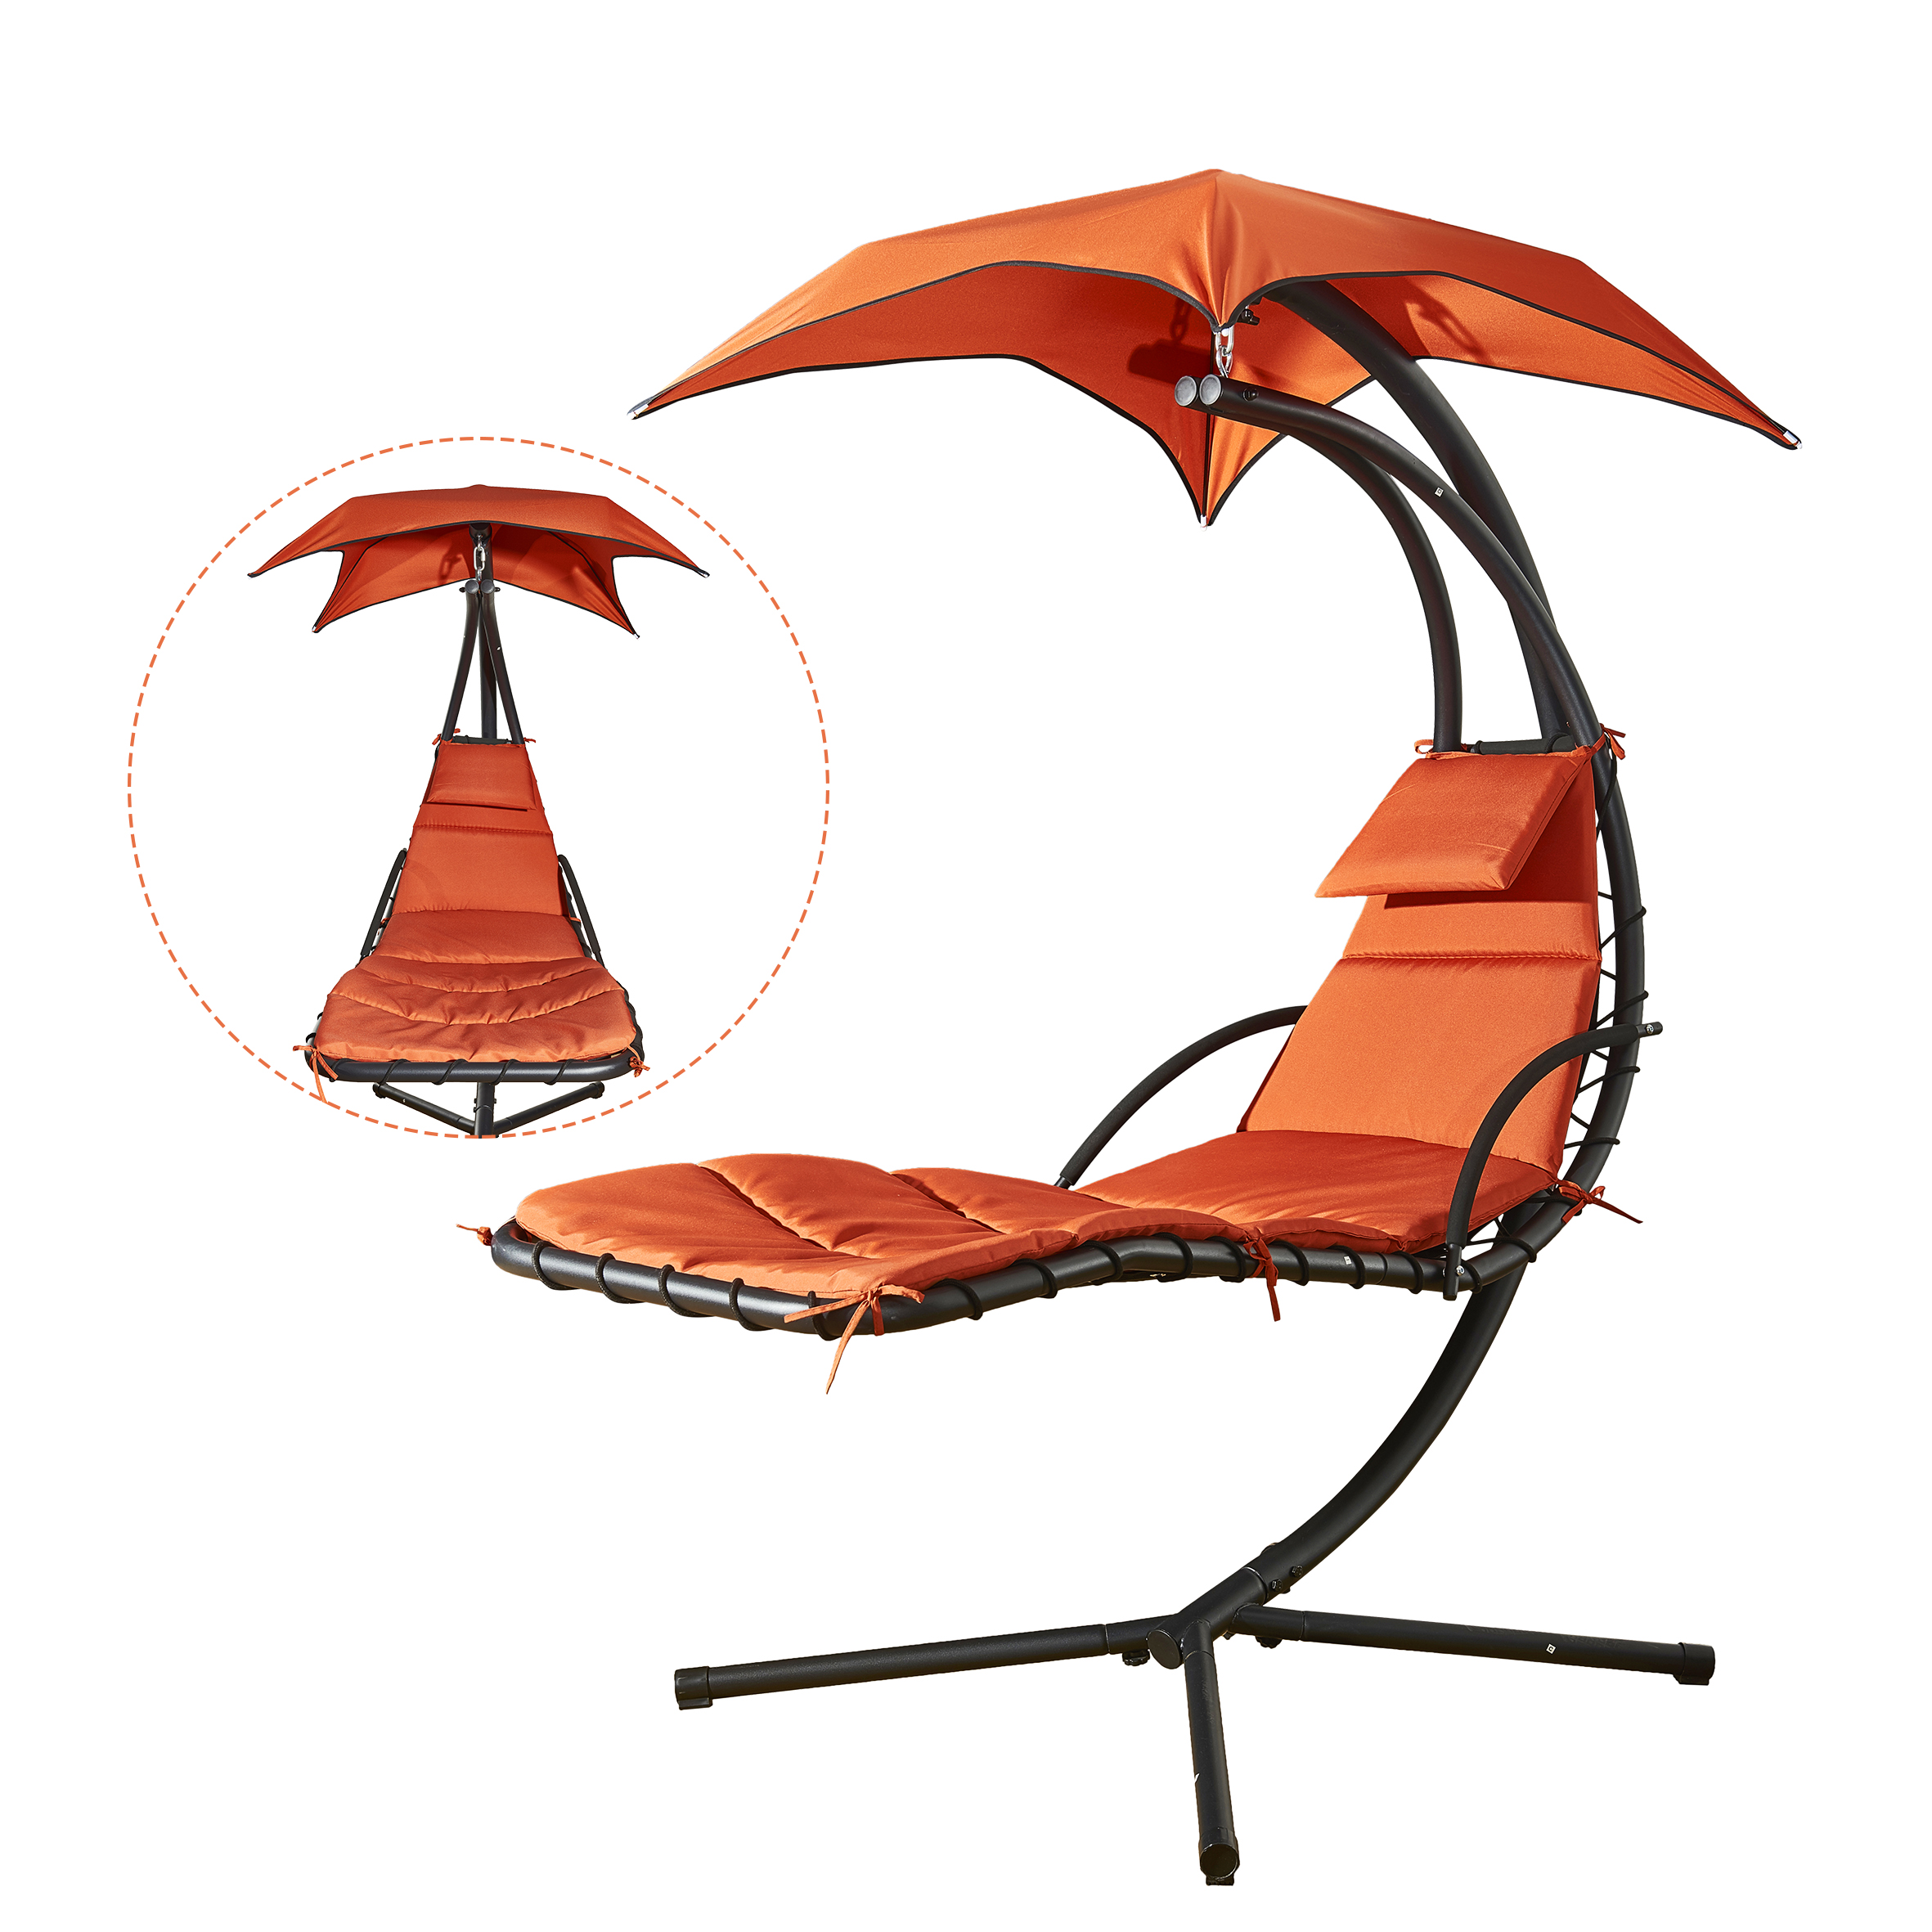 Hanging Chaise Lounge Chair Canopy Floating Chaise Lounger Swing Hammock Chair, for Patio, Garden, Deck and Poolside - image 1 of 6